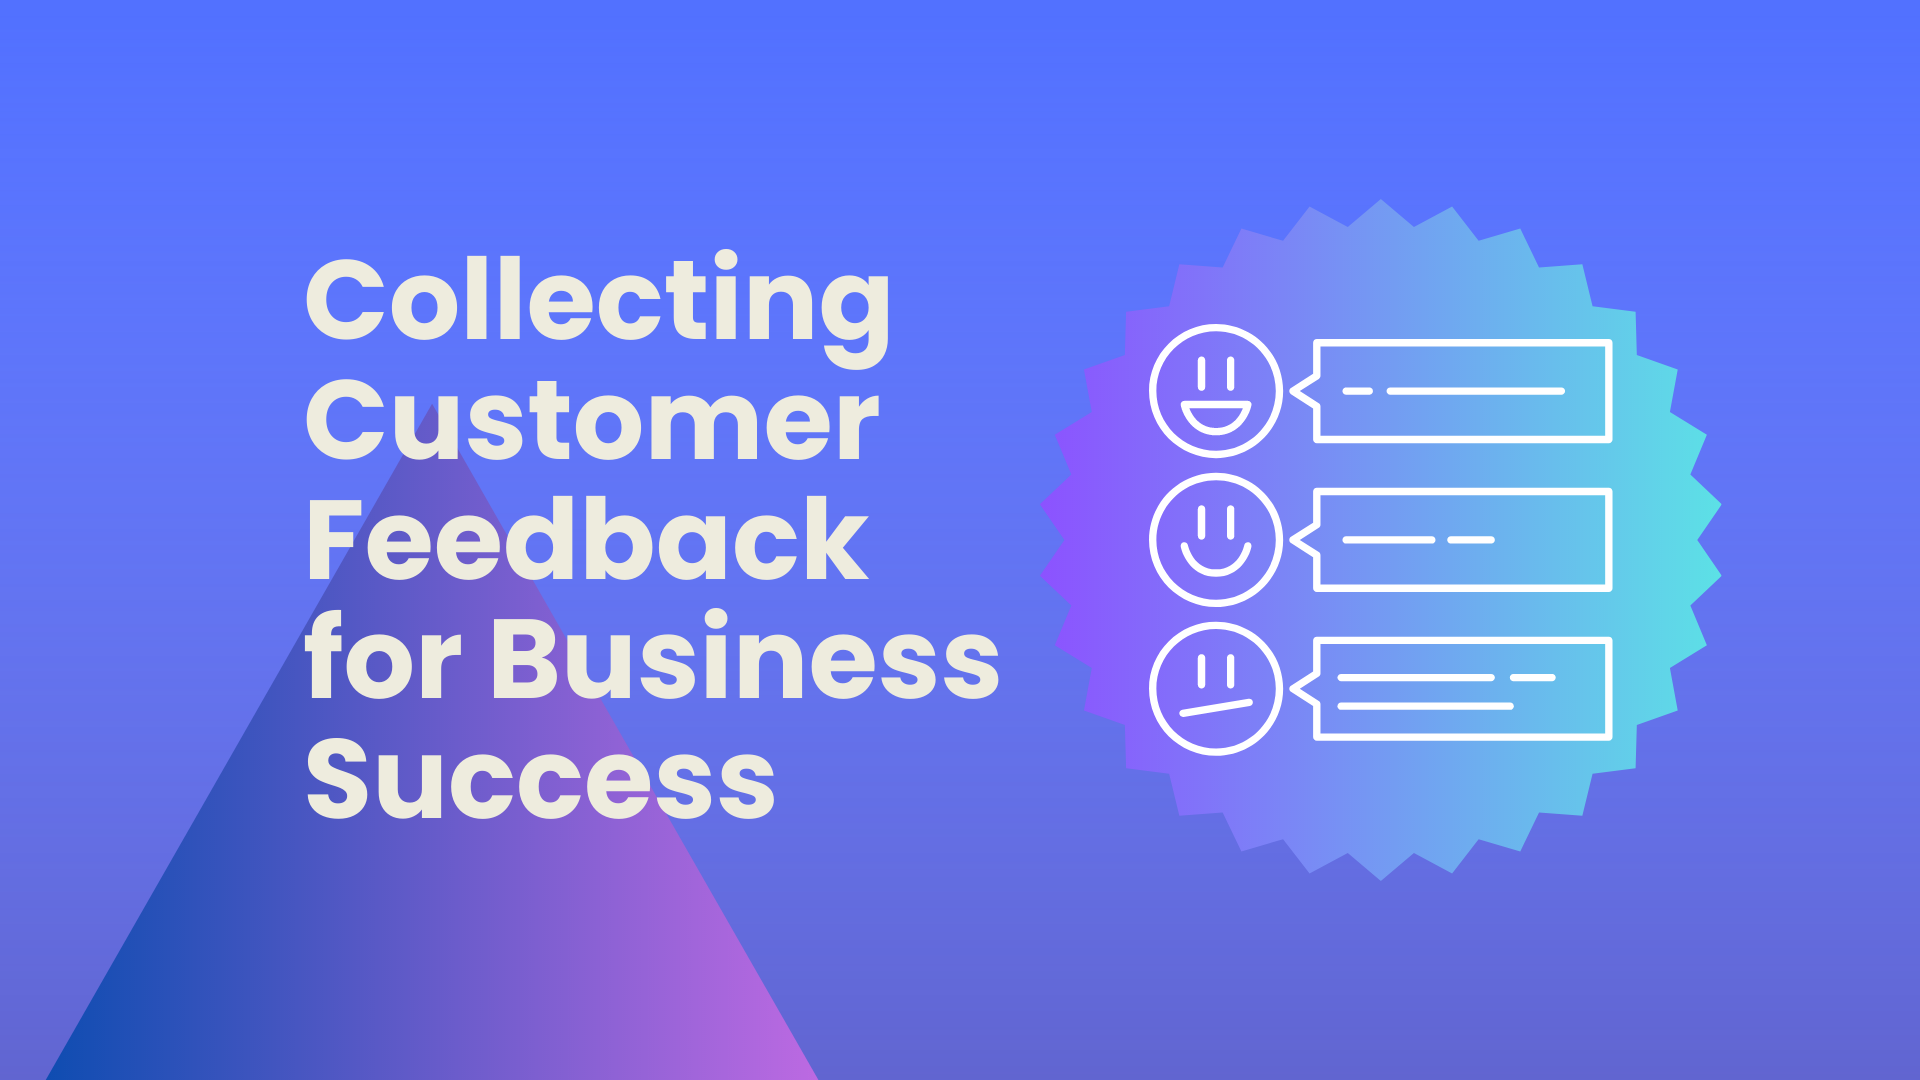 Collecting Customer Feedback for Business Success